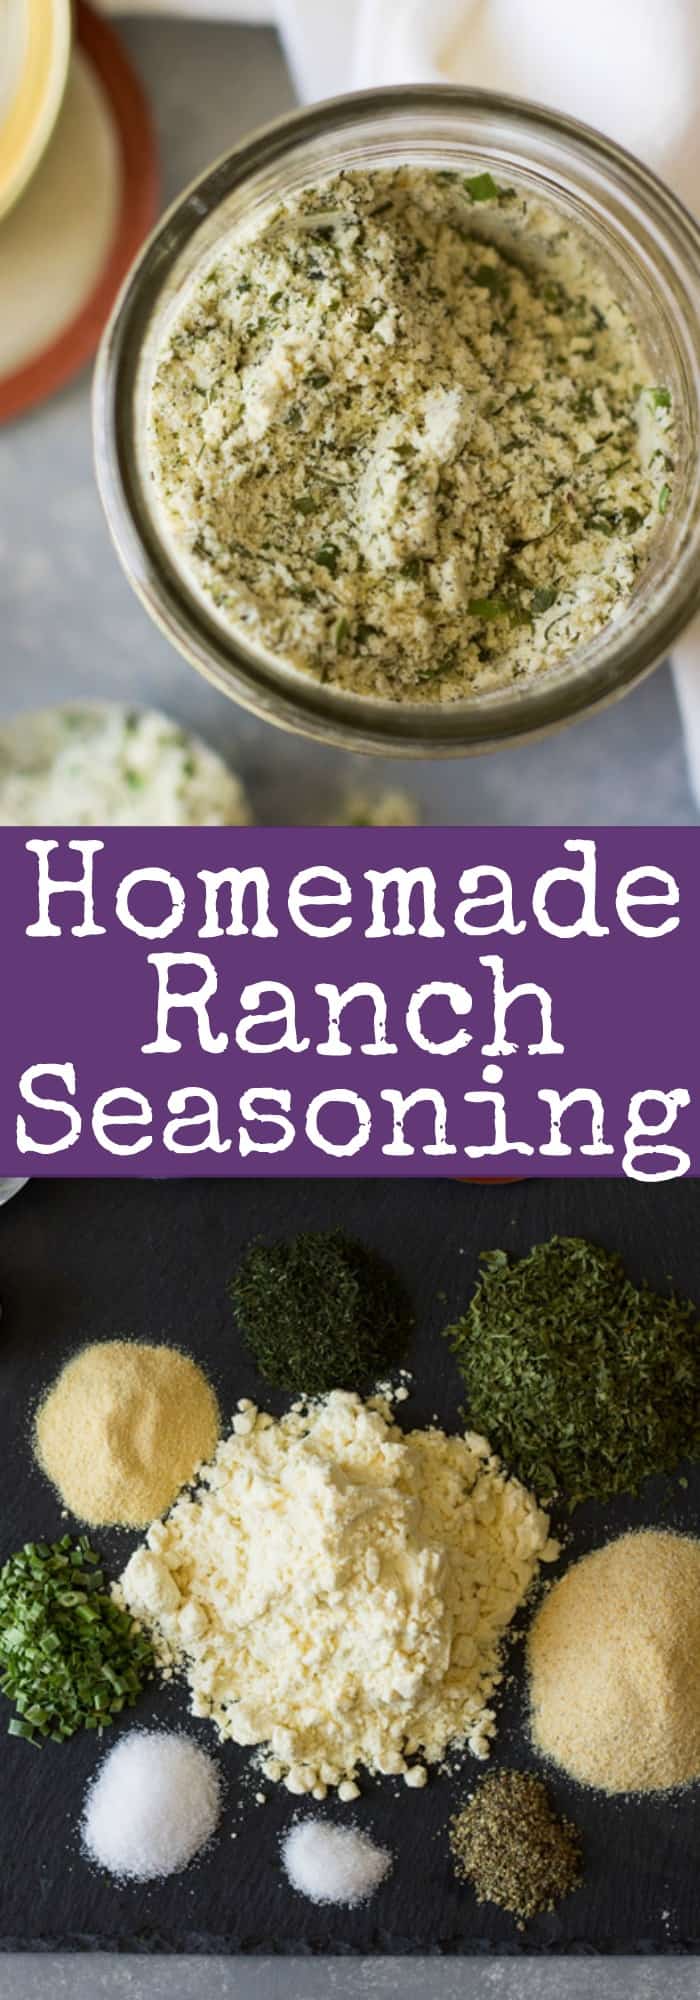 DIY Homemade Ranch Seasoning recipe for a quick and easy alternative to those store bought packets! | www.countrysidecravings.com